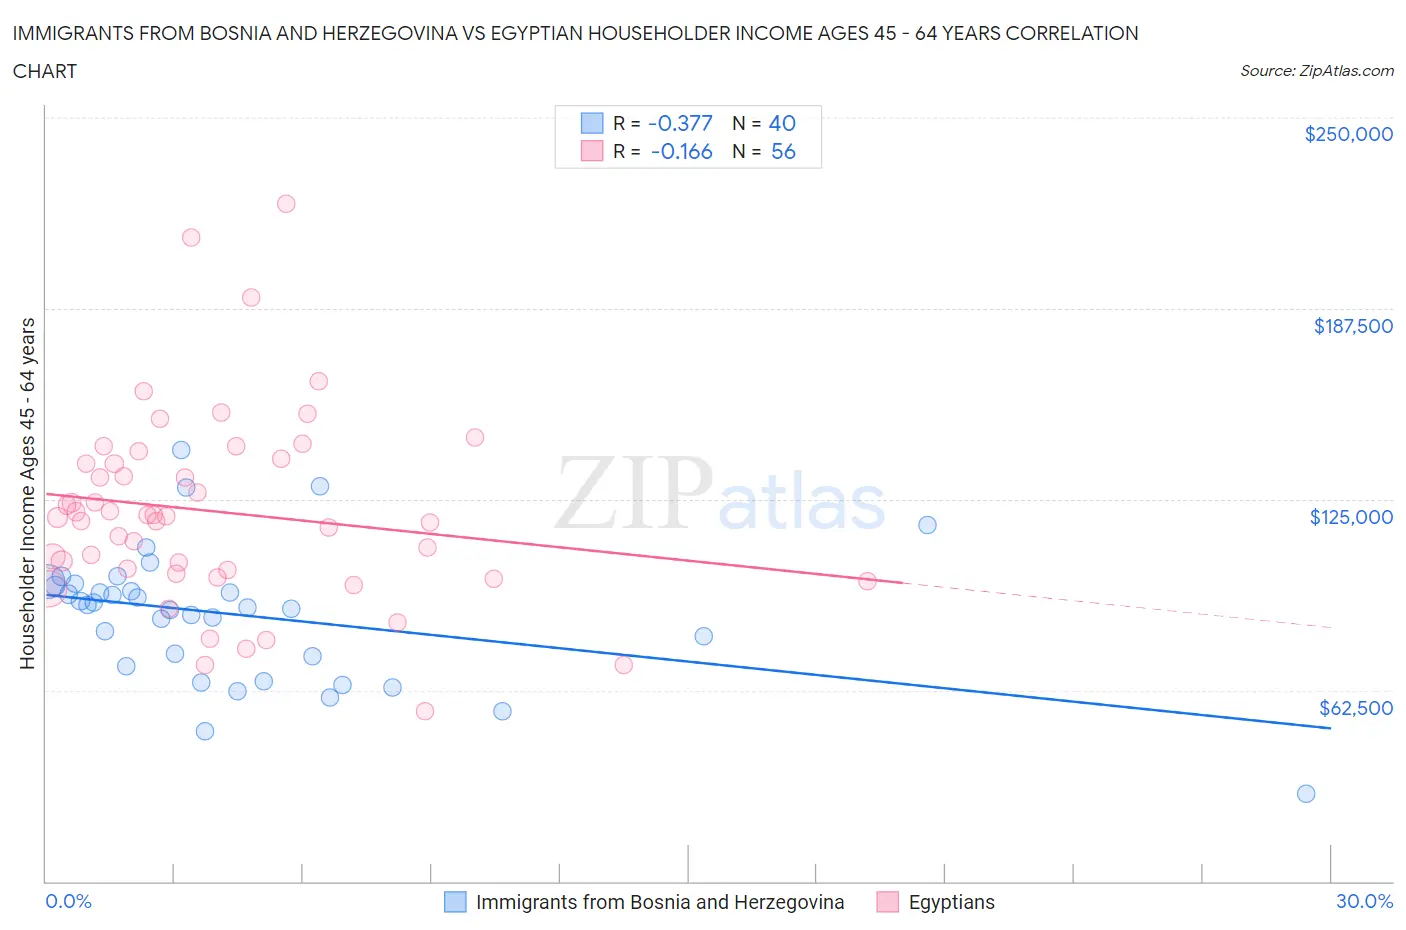 Immigrants from Bosnia and Herzegovina vs Egyptian Householder Income Ages 45 - 64 years